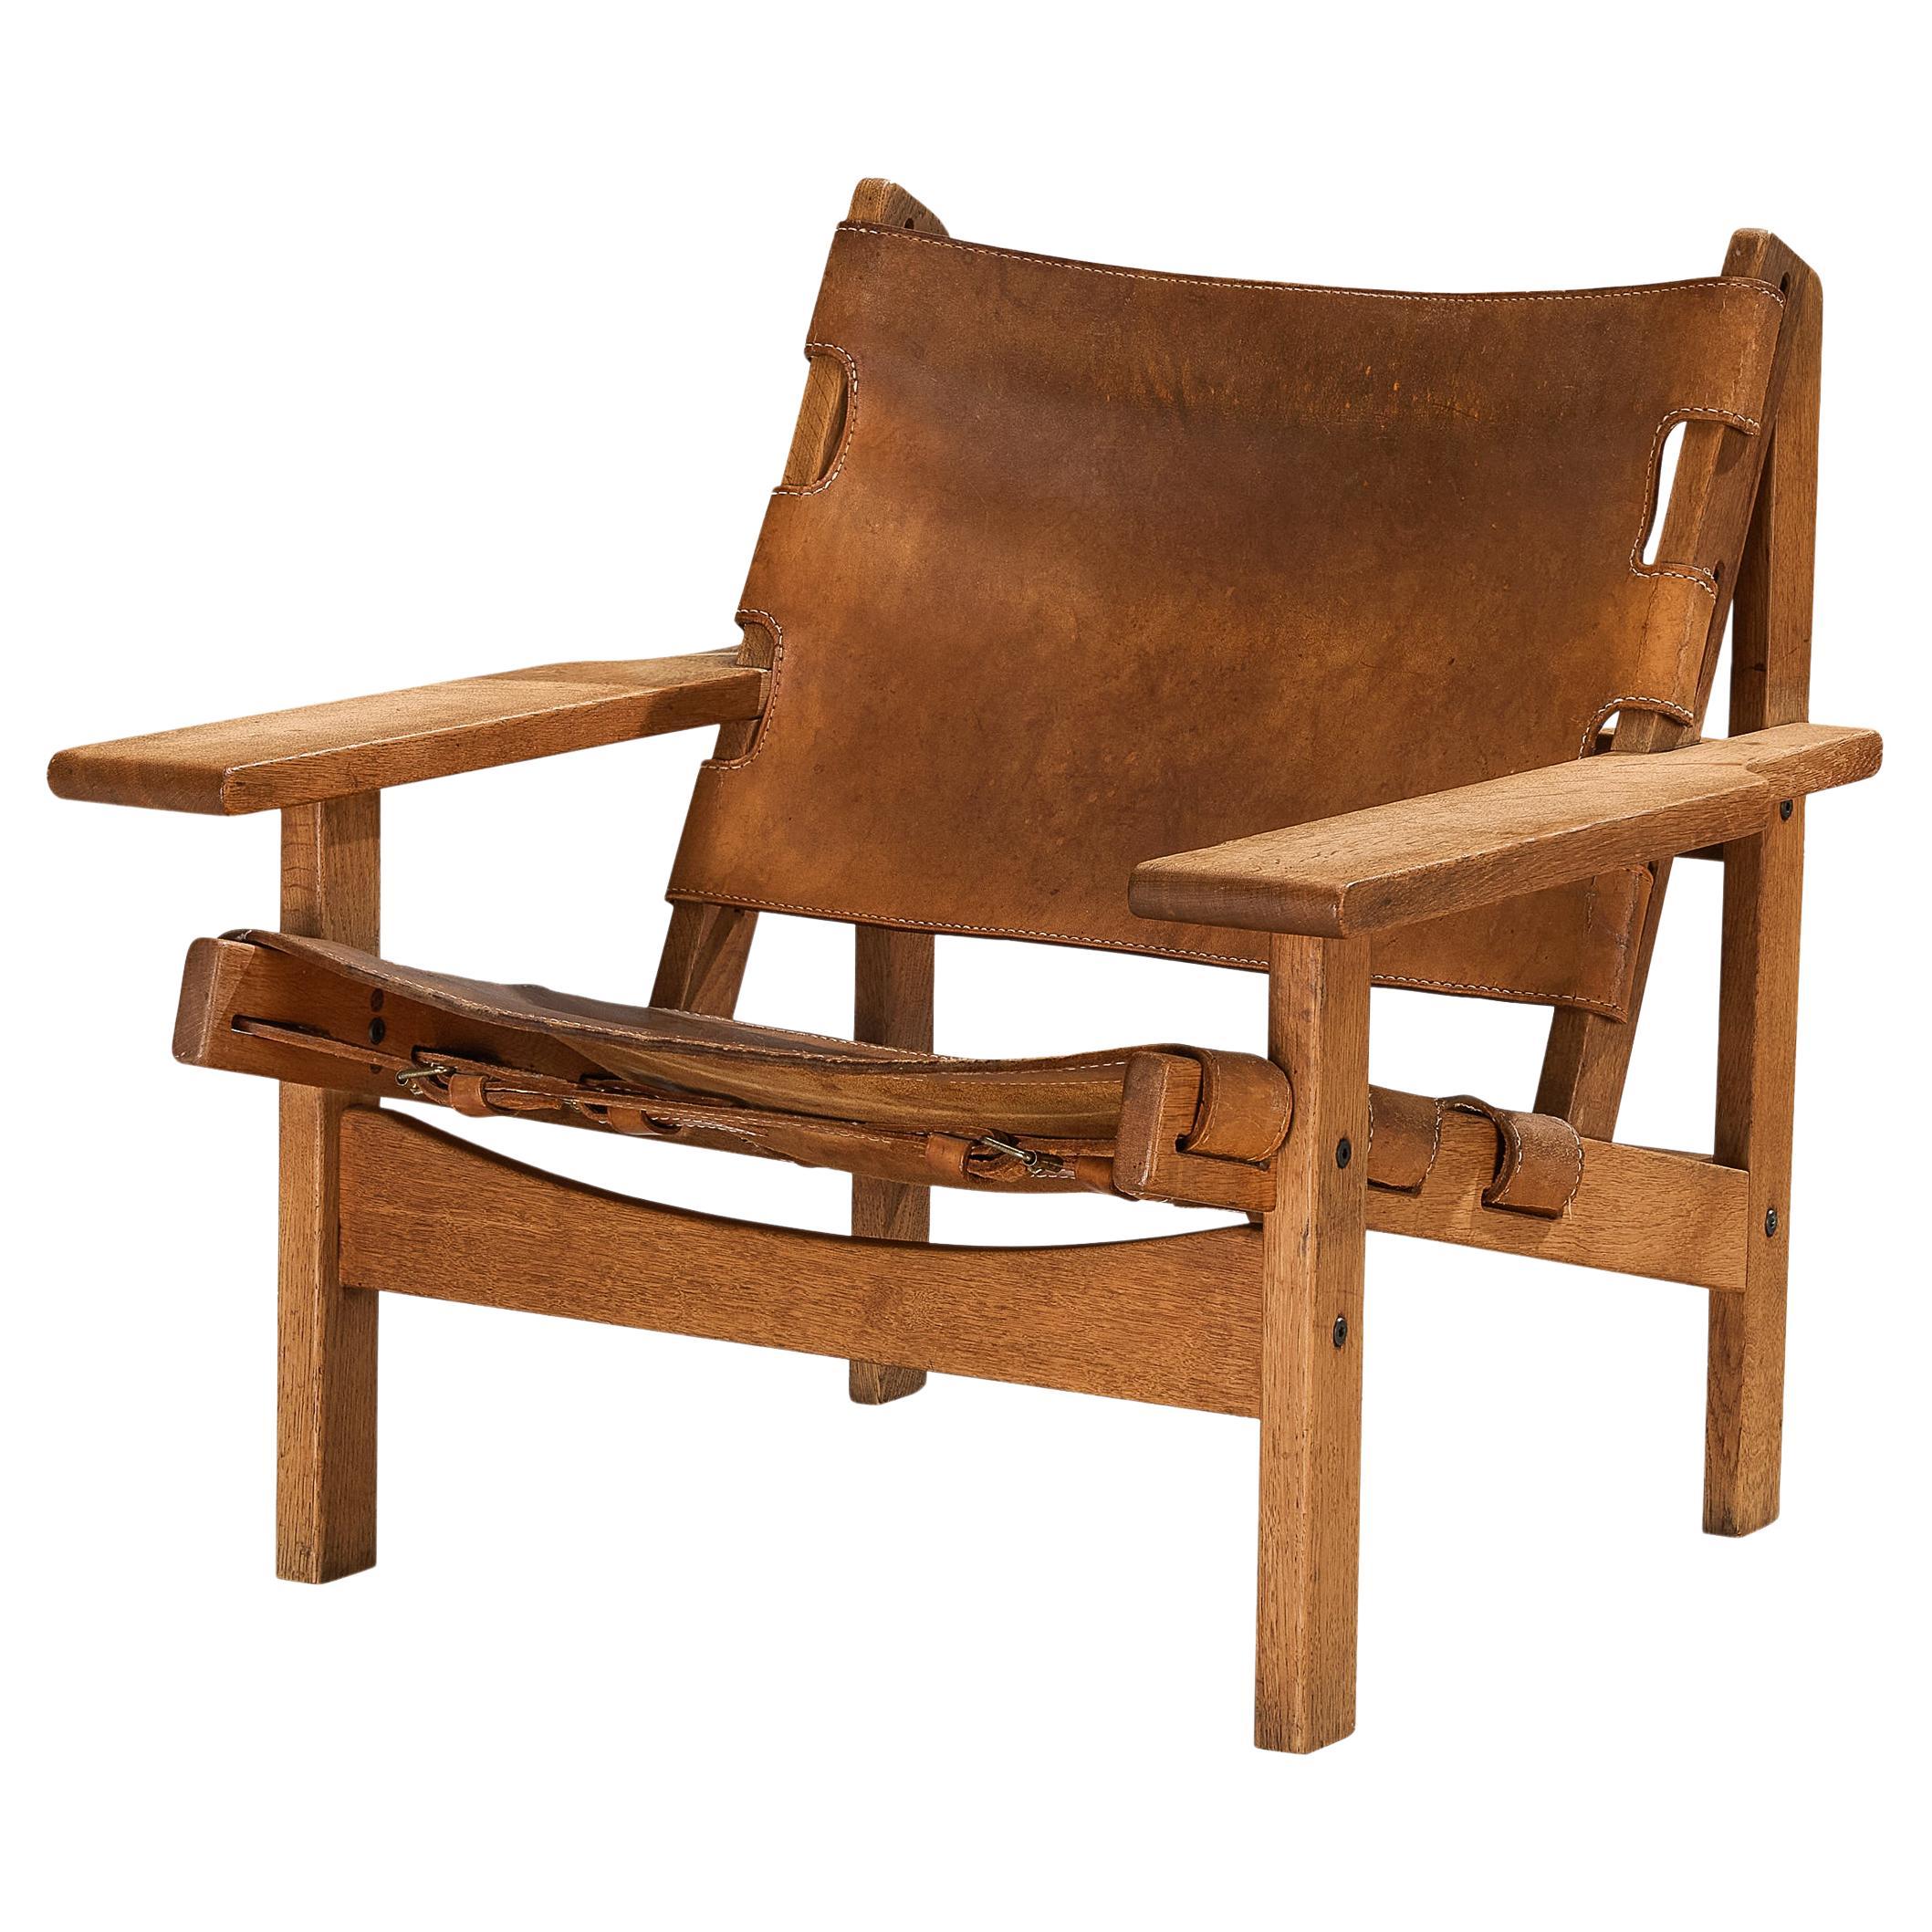  Kurt Østervig 'Hunting' Lounge Chair in Cognac Leather and Oak  For Sale